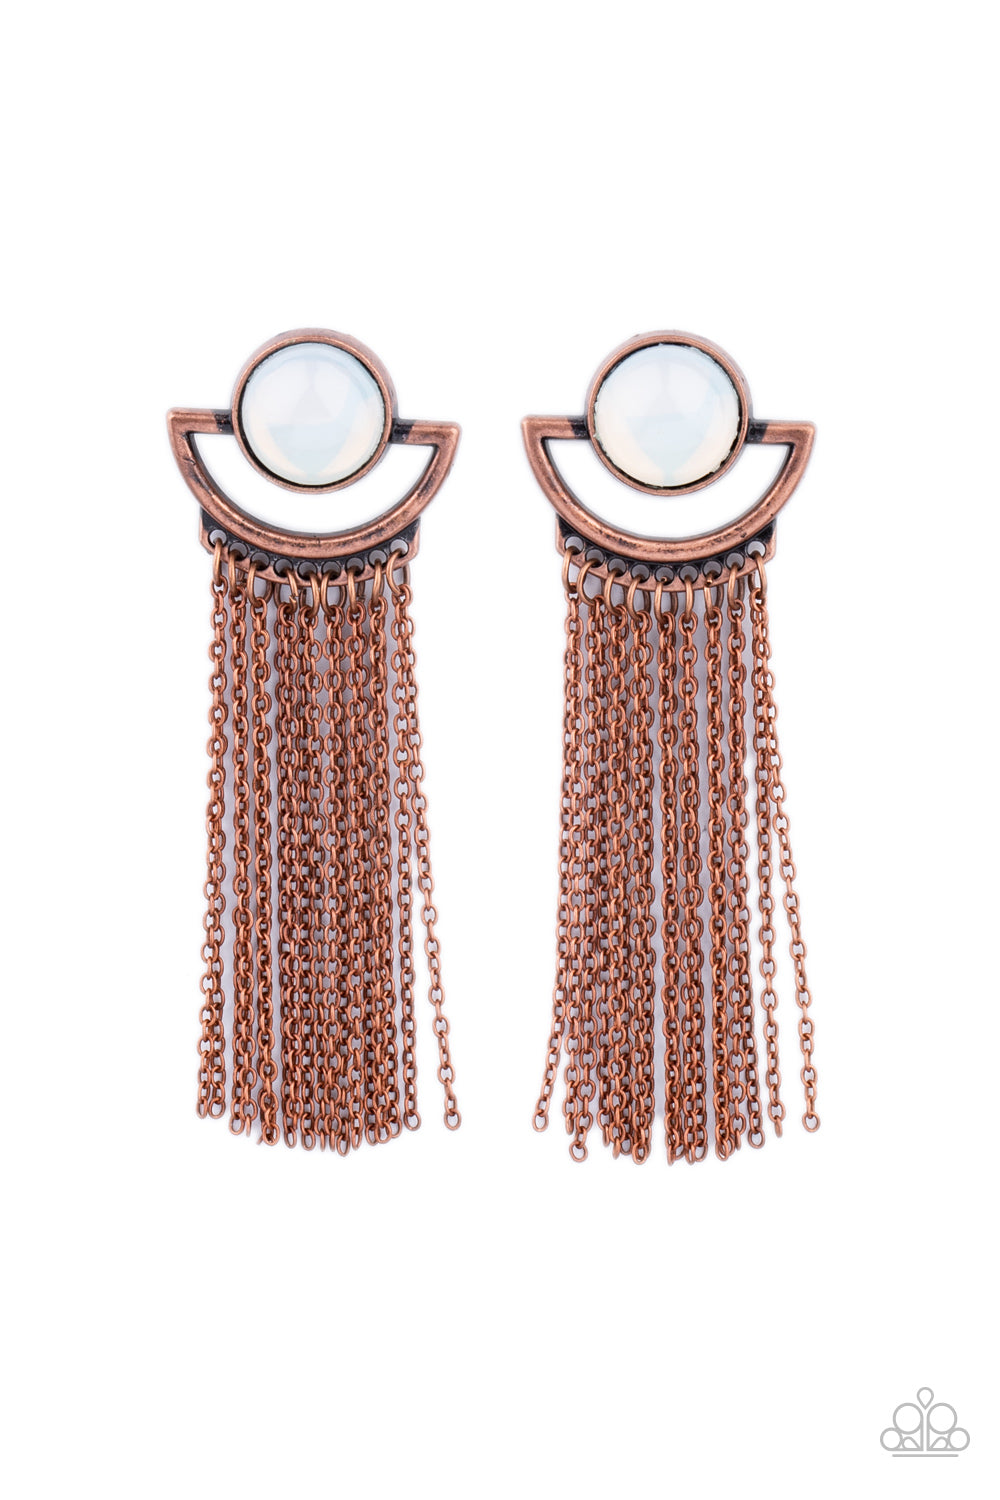 Cupid, Who? Copper Heart Post Earrings - Paparazzi Accessories